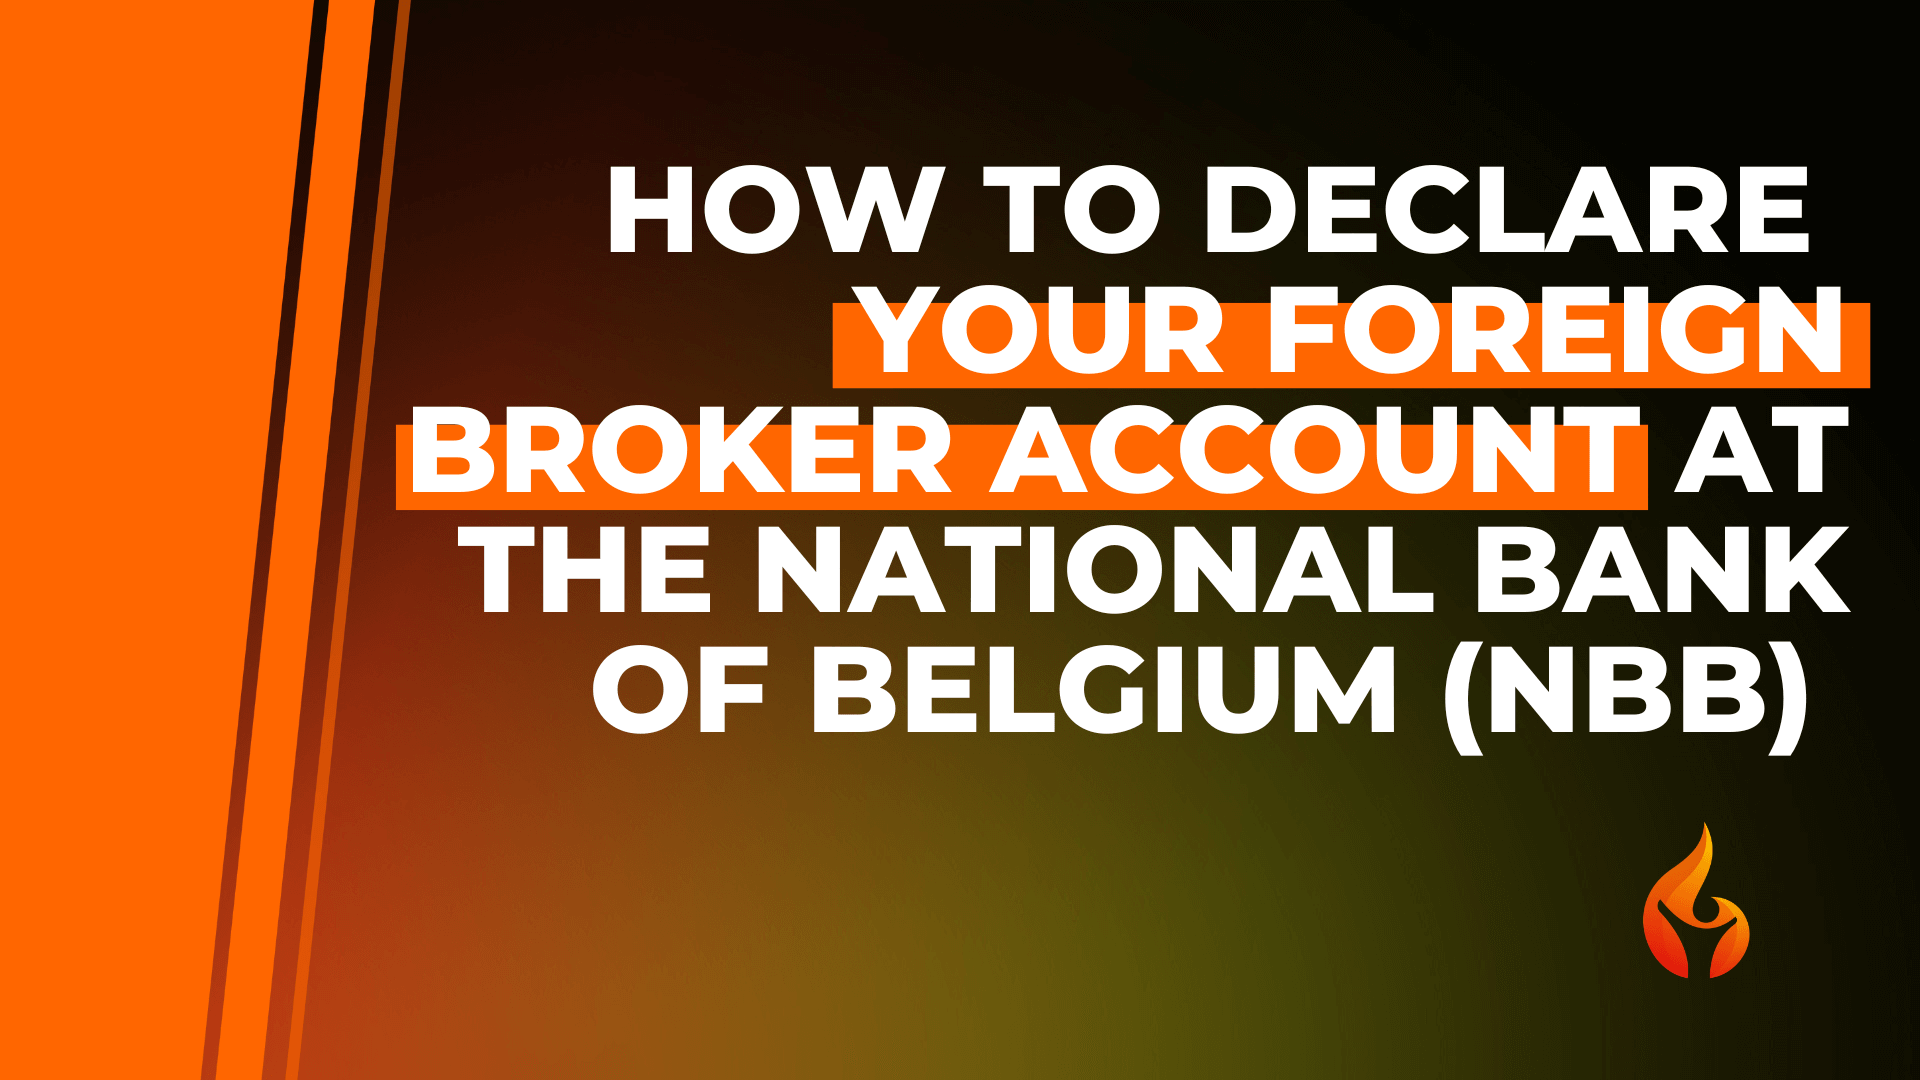 how-to-declare-your-foreign-broker-account-at-the-national-bank-of-belgium-nbb